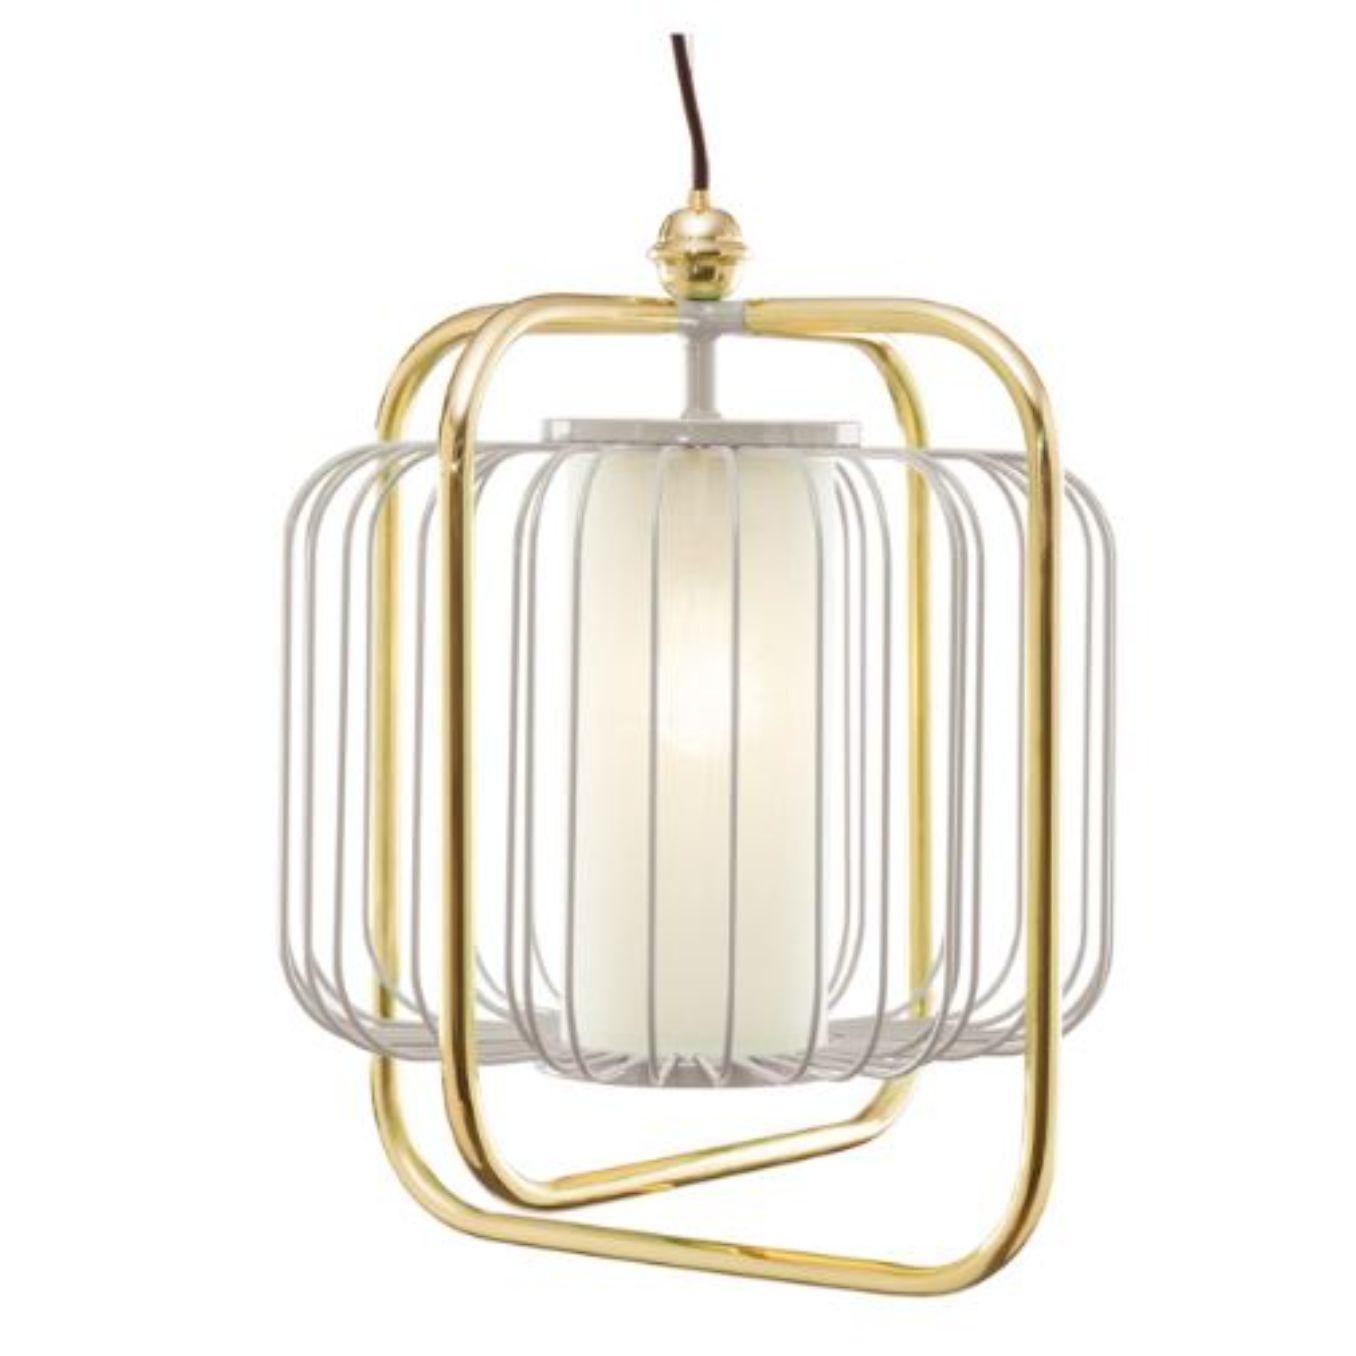 Brass and Moss Jules III Suspension Lamp by Dooq For Sale 1